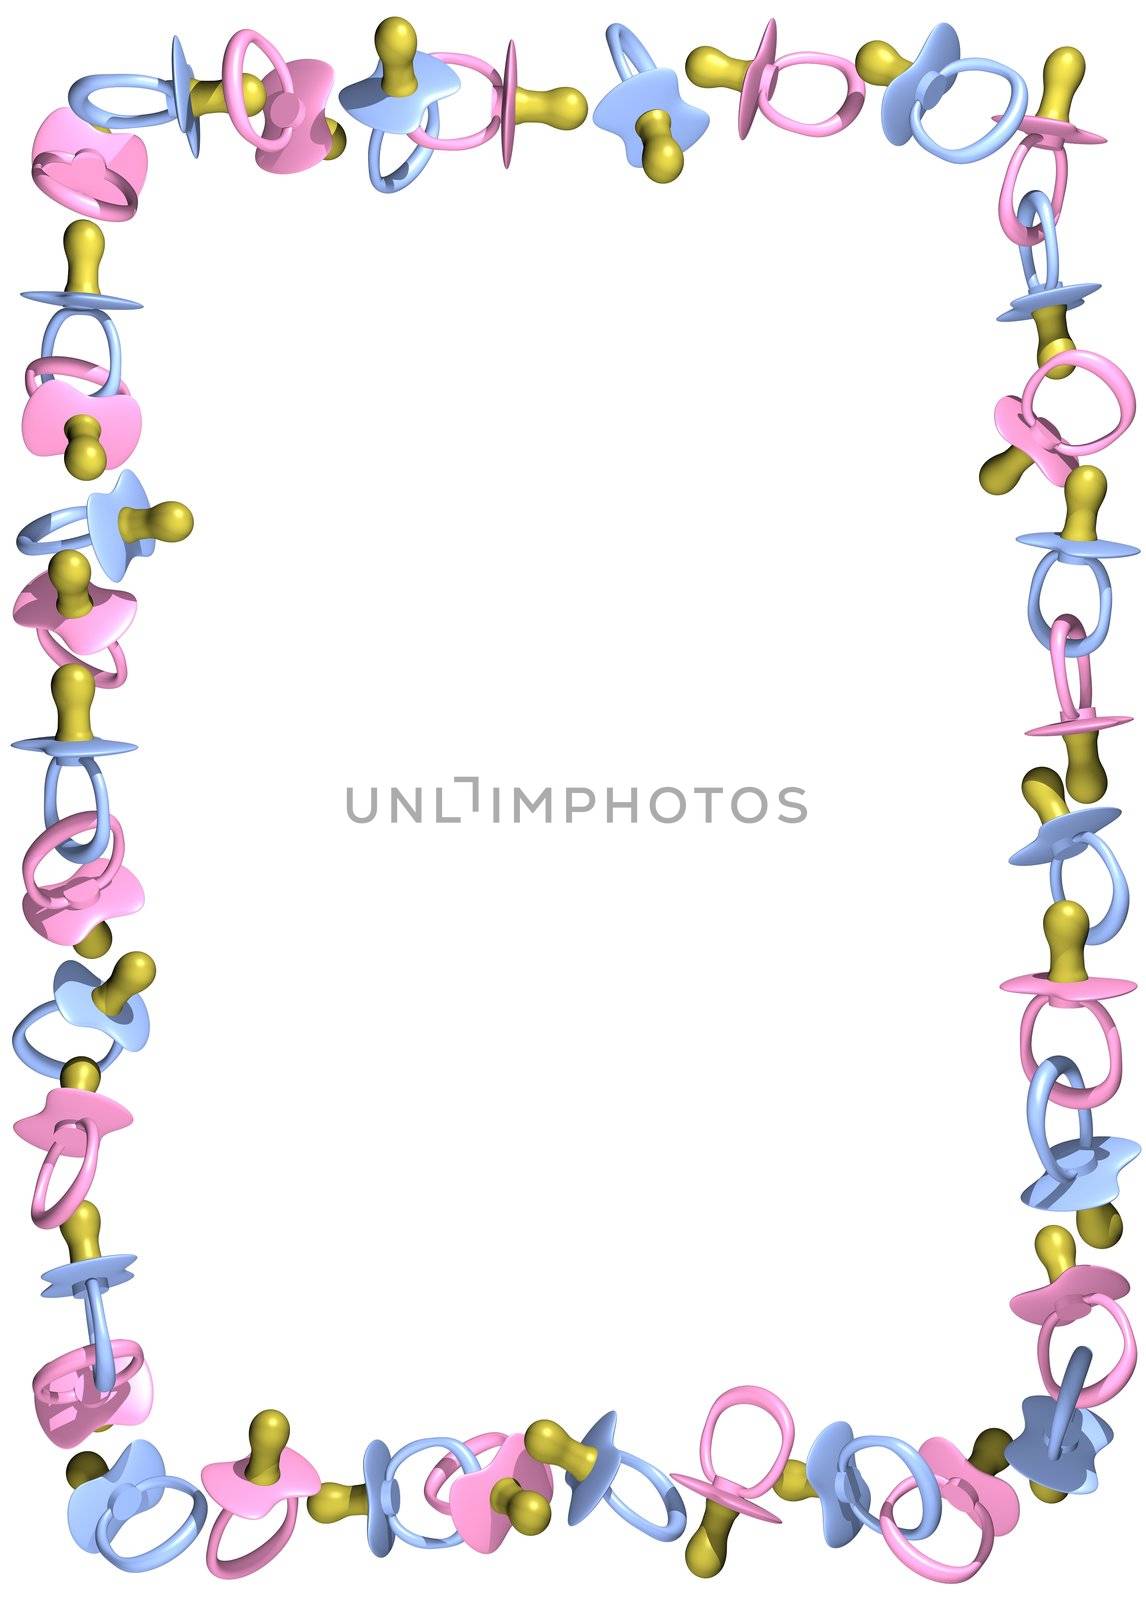 Illustration of a frame made of Pacifiers